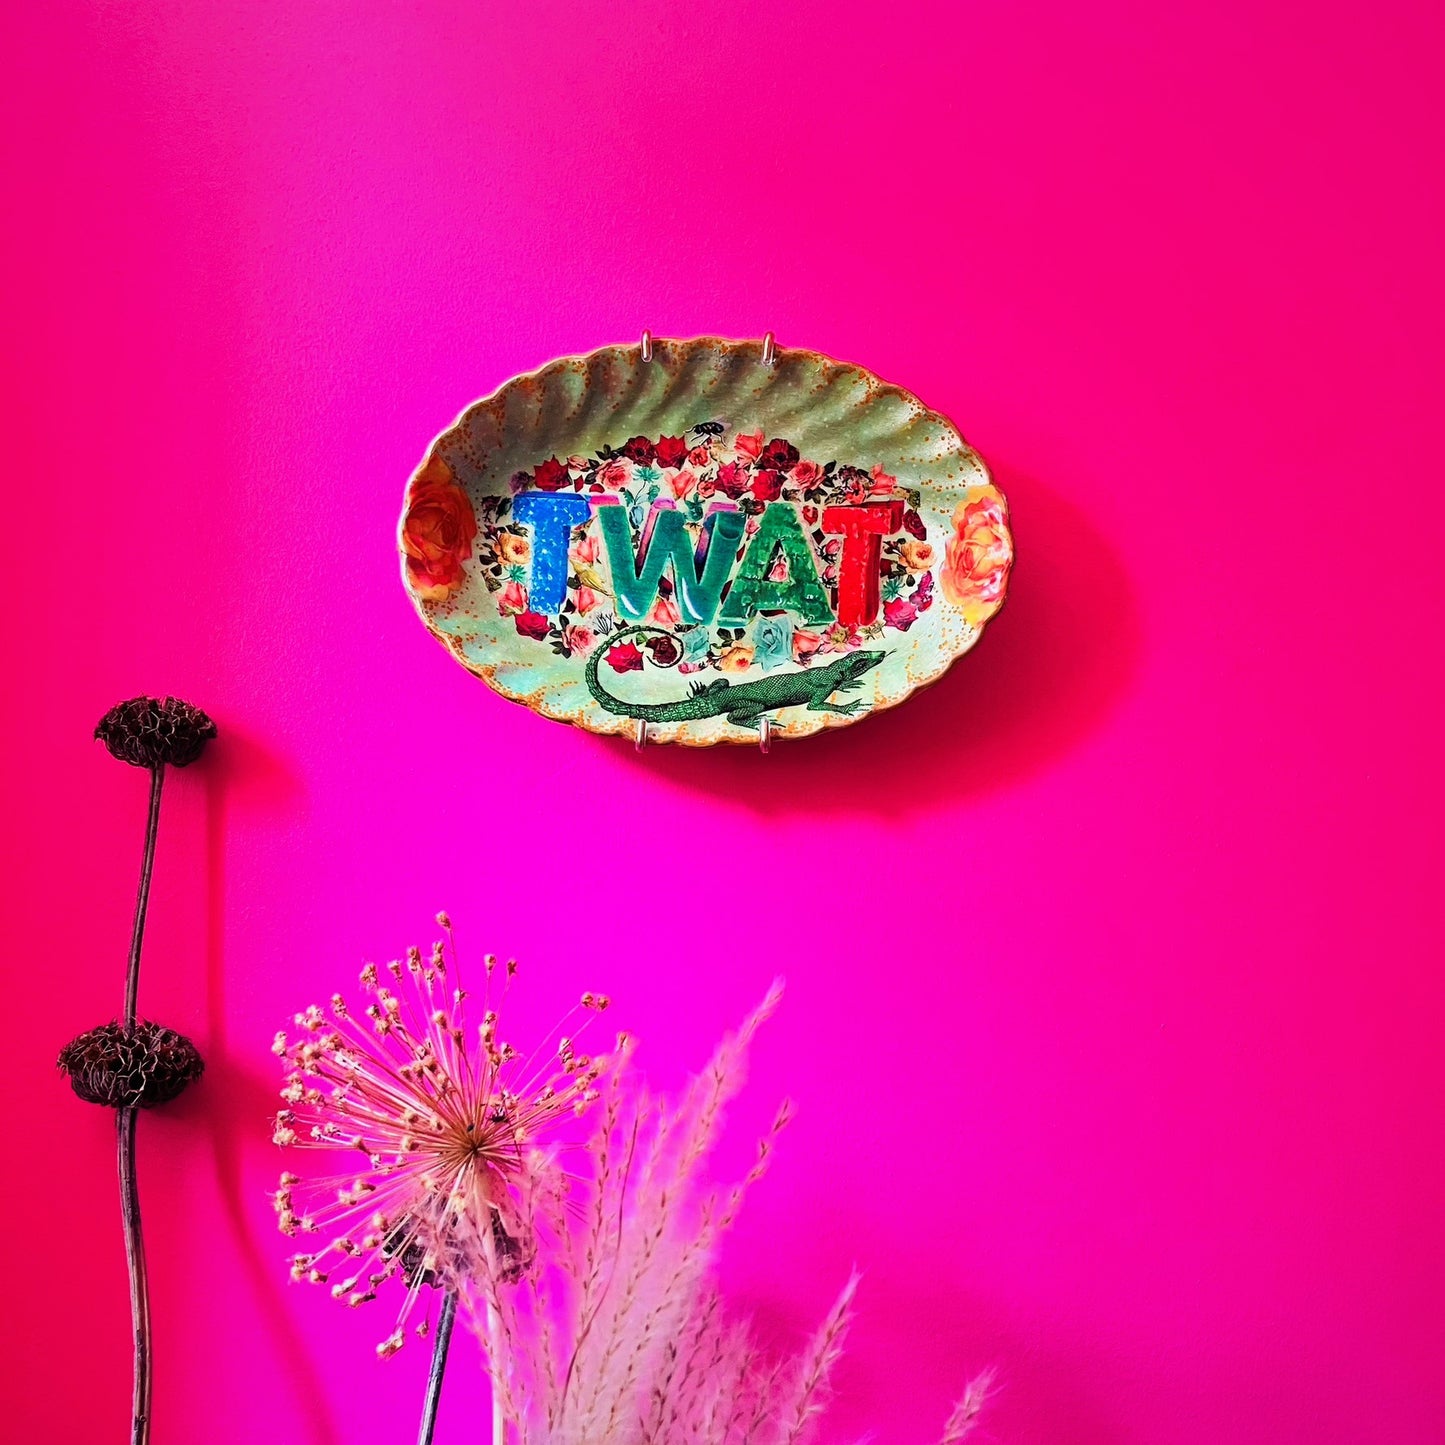 Green Upcycled Wall Plate - "Twat" - by House of Frisson